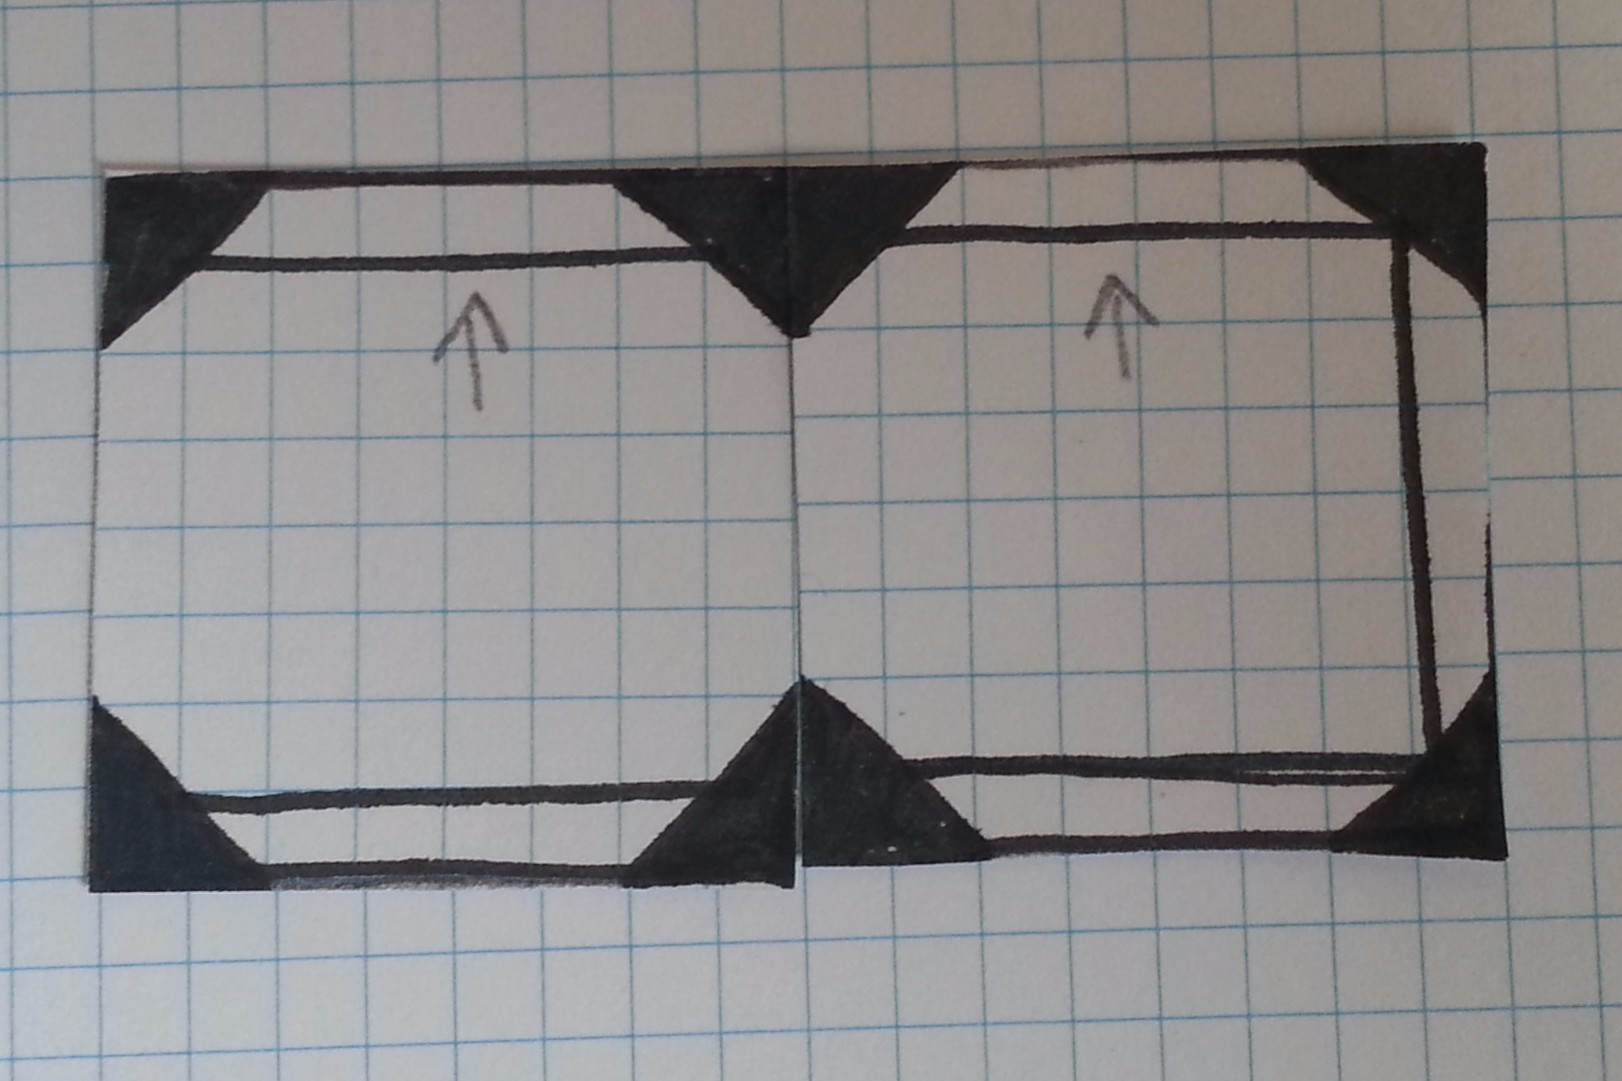 Two tiles can be arranged to create a very simple corridor. The arrows on the paper simply indicate which direction is "up" so tiles can be differentiated.